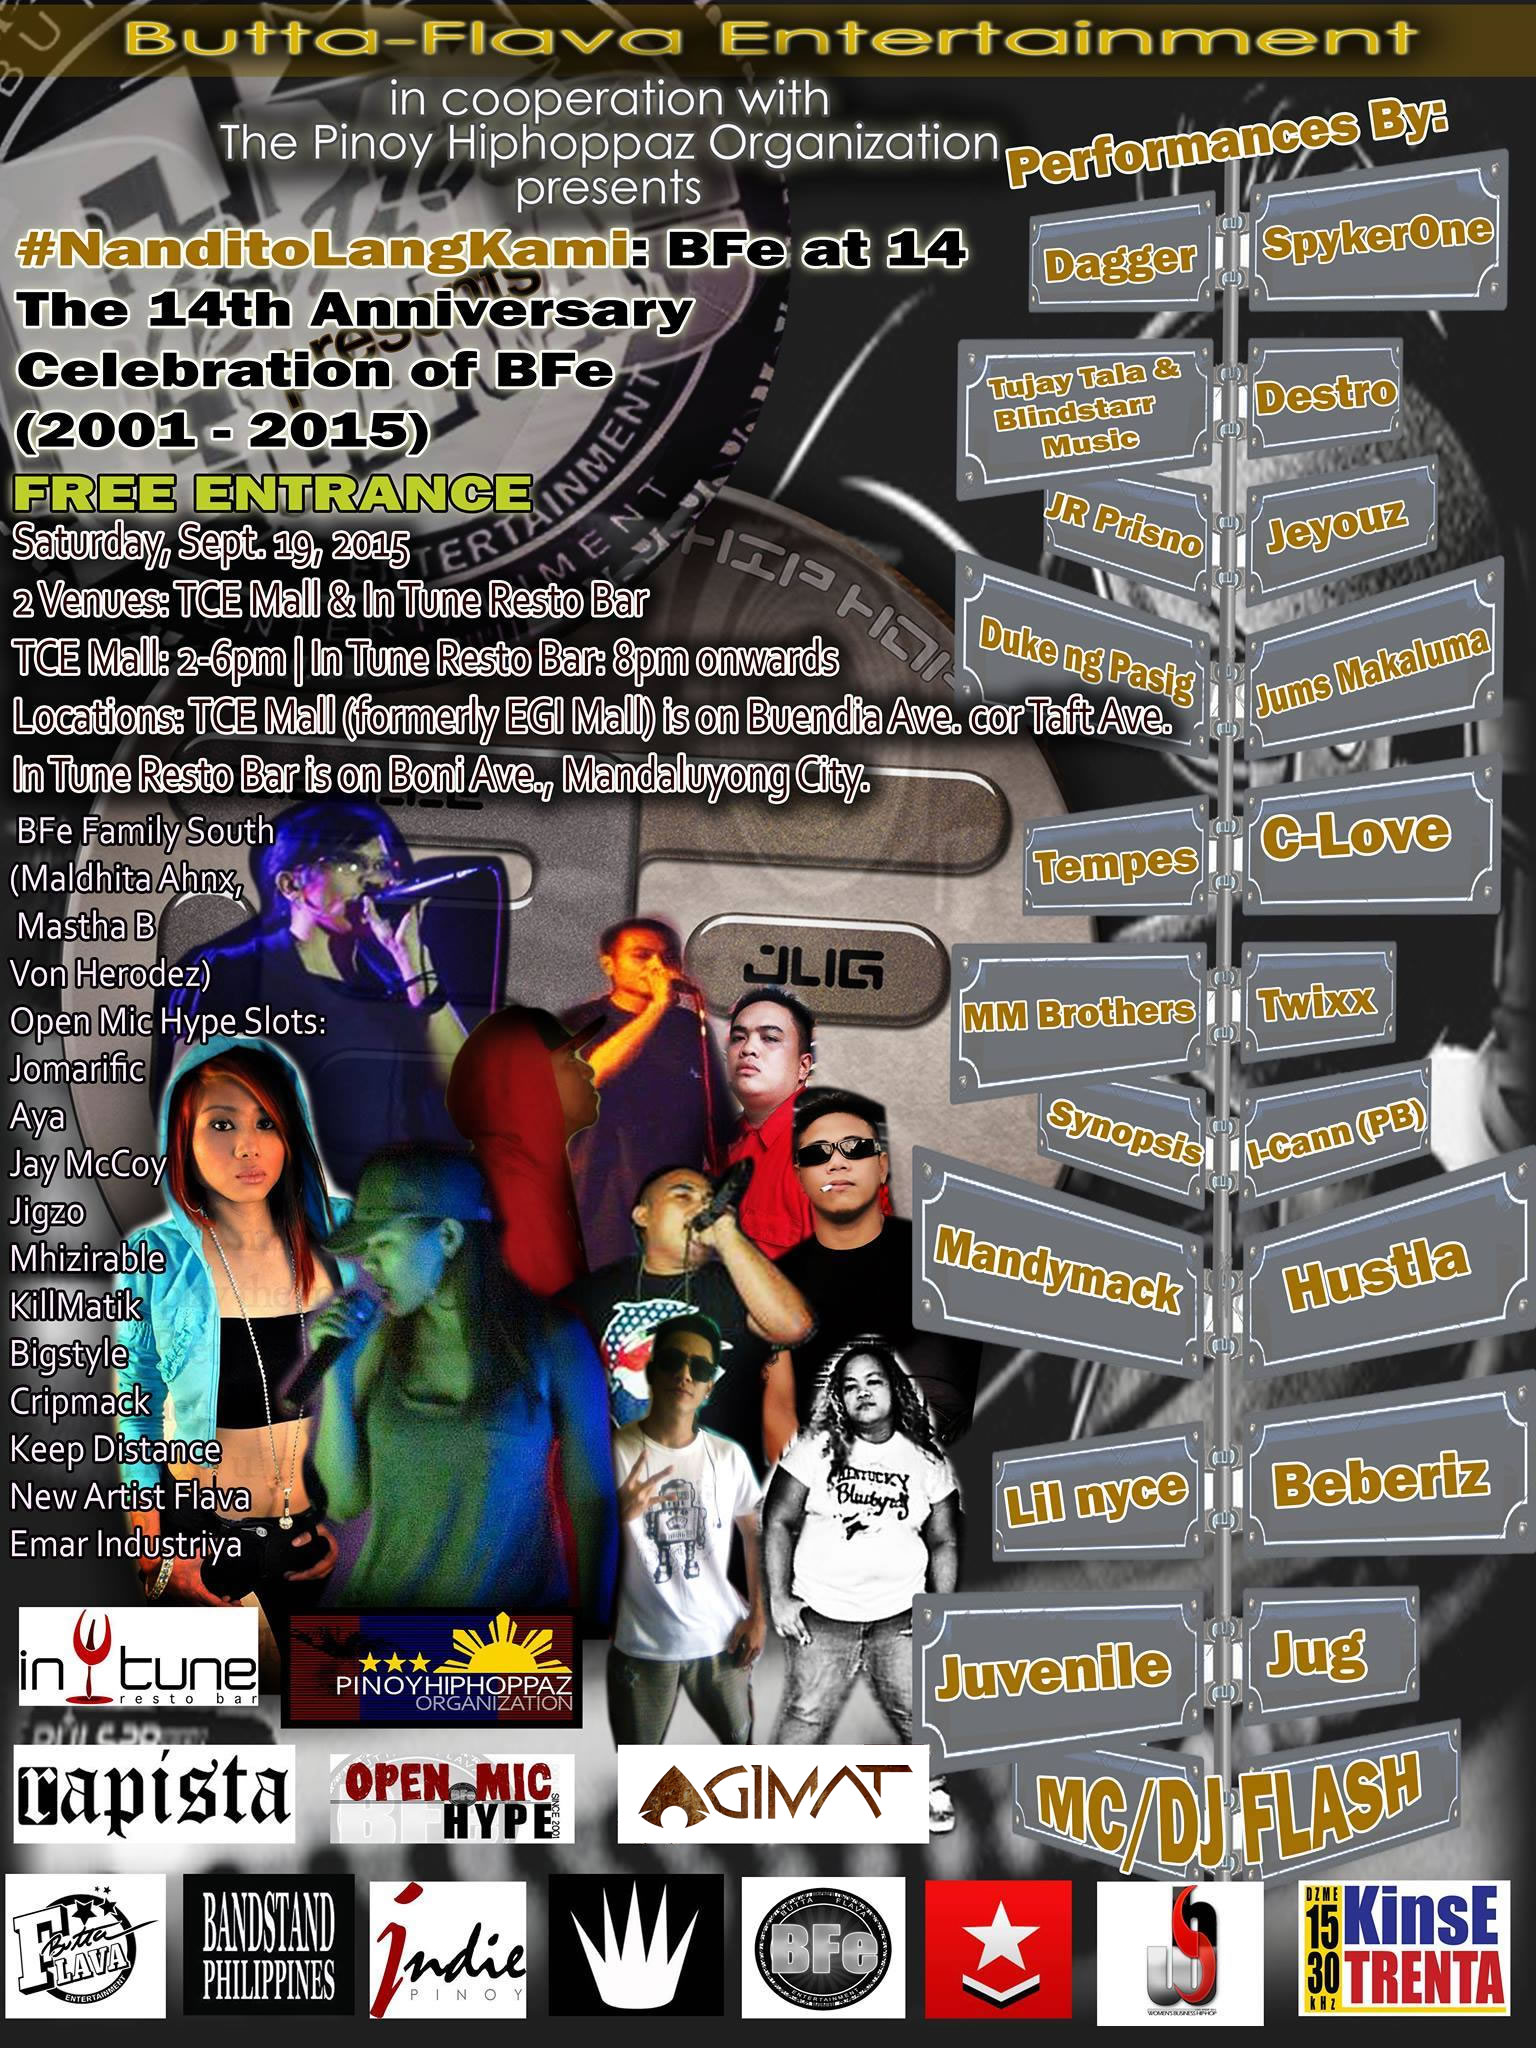 Butta-Flava Entertainment #NanditoLangKami: BFe at 14 - Here is the FINAL poster for the Sept. 19th event (PART 1) courtesy of Marvin Deris. #Spread #Share #Support #ButtaFlava #BFe #PinoyRap #HipHop #Anniversary #14Years RSVP | EVENT PAGE: https://www.facebook.com/events/811584805624082/ ----- Joseph James Villena Salvador Let Us Support #BFe In Their 14th Year Anniversary Celebration This Weekend! smile emoticon Help Us Spread The Word By Reposting, Thank You & See You @ The Events! wink emoticon #JUVENILEd. @lychnobites #XDV #4thWorld #JDP #MMB